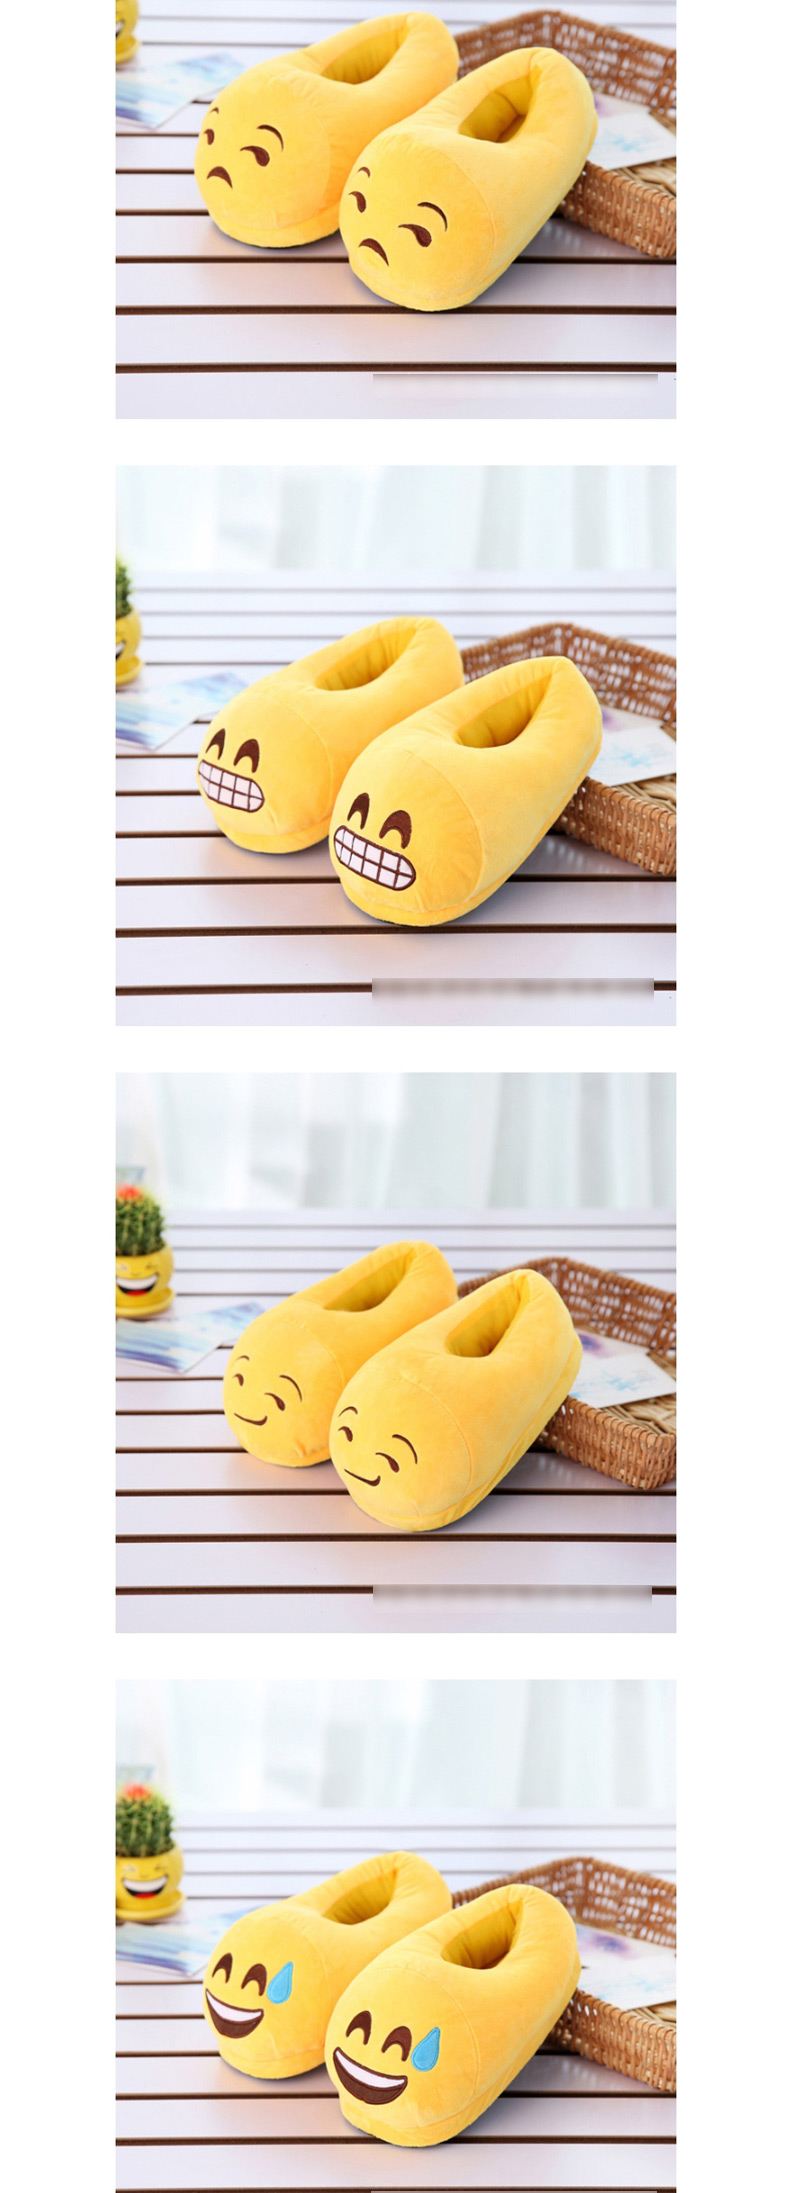 Fashion 1 Yellow Big Love Cartoon Expression Plush Bag With Cotton Slippers,Slippers